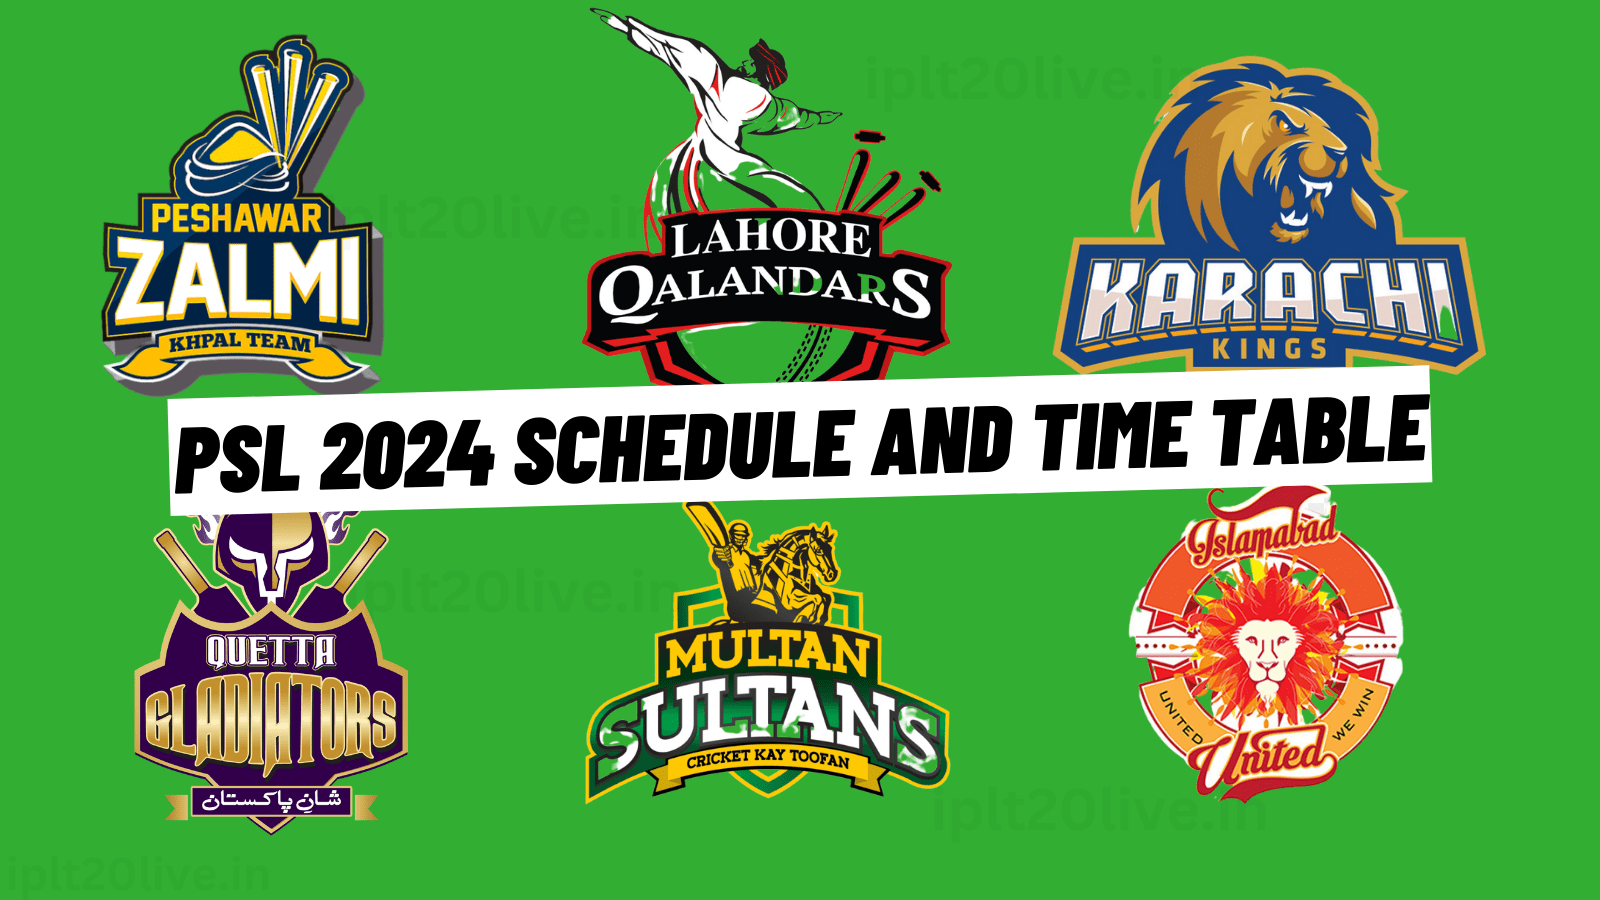 PSL 2024 Schedule and Time table